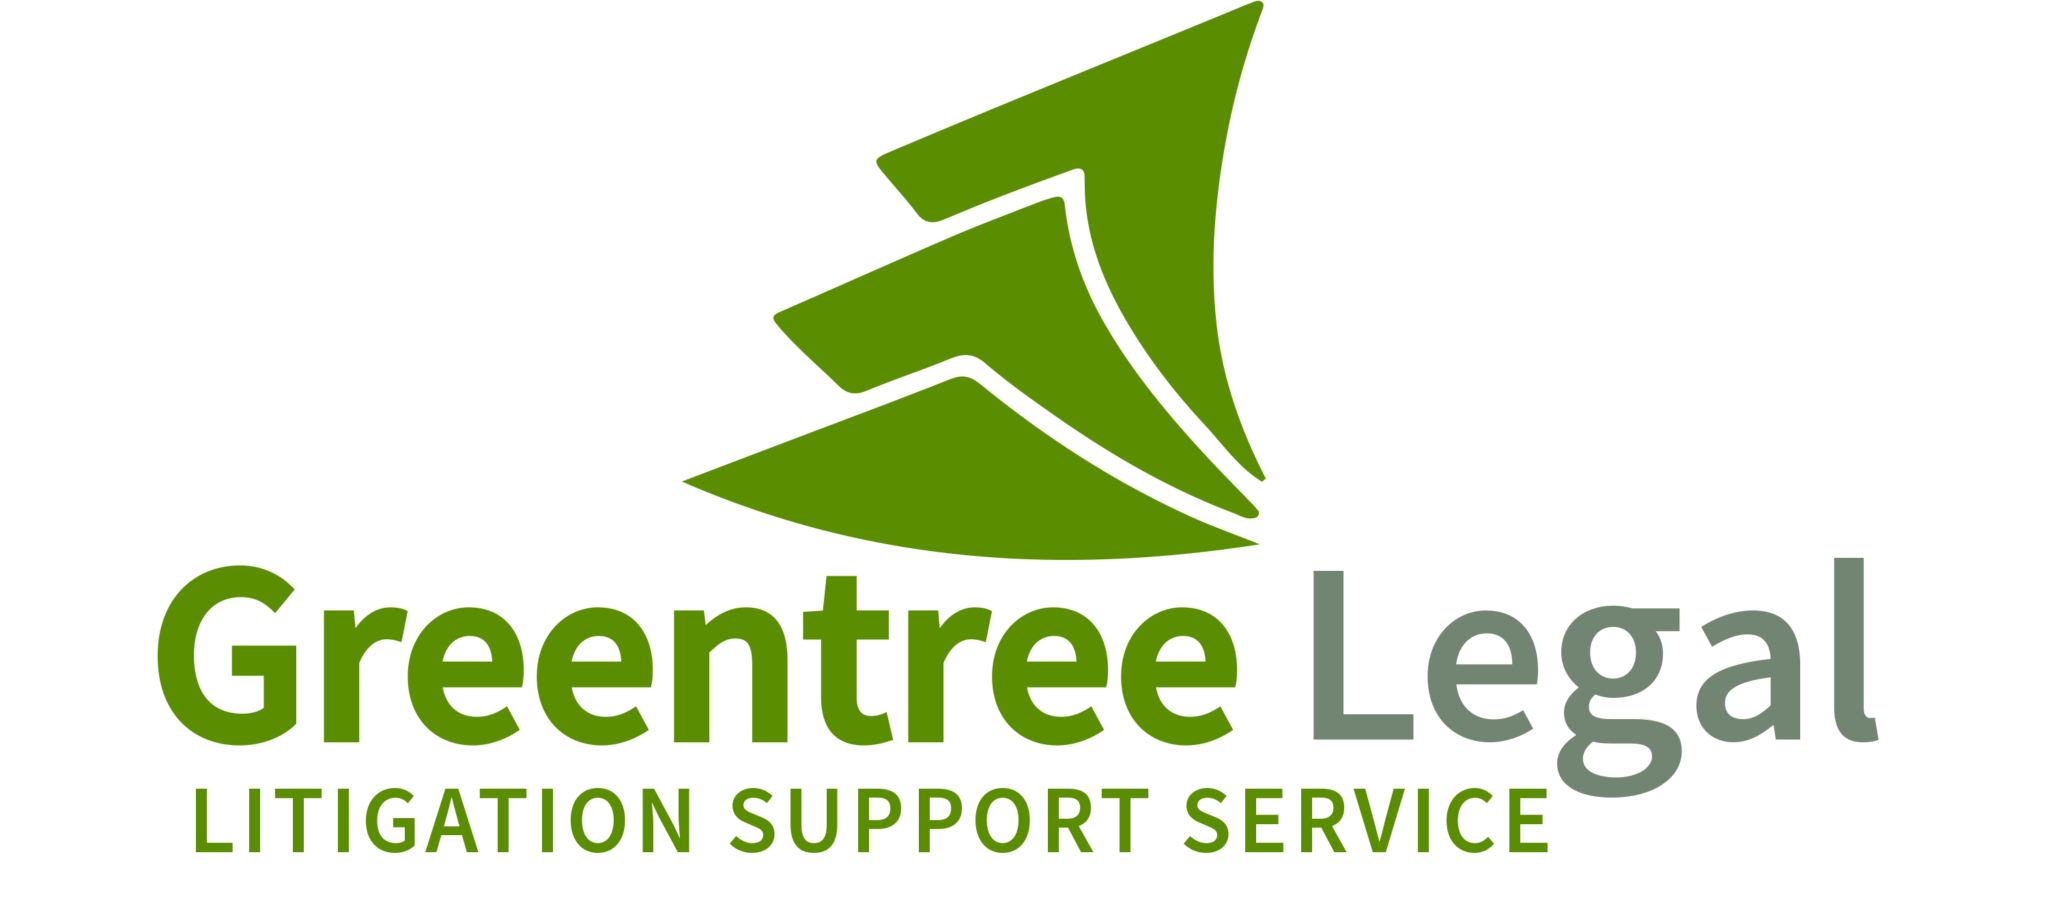 GREEN TREE LEGAL LOGO 1 - Florence, KY